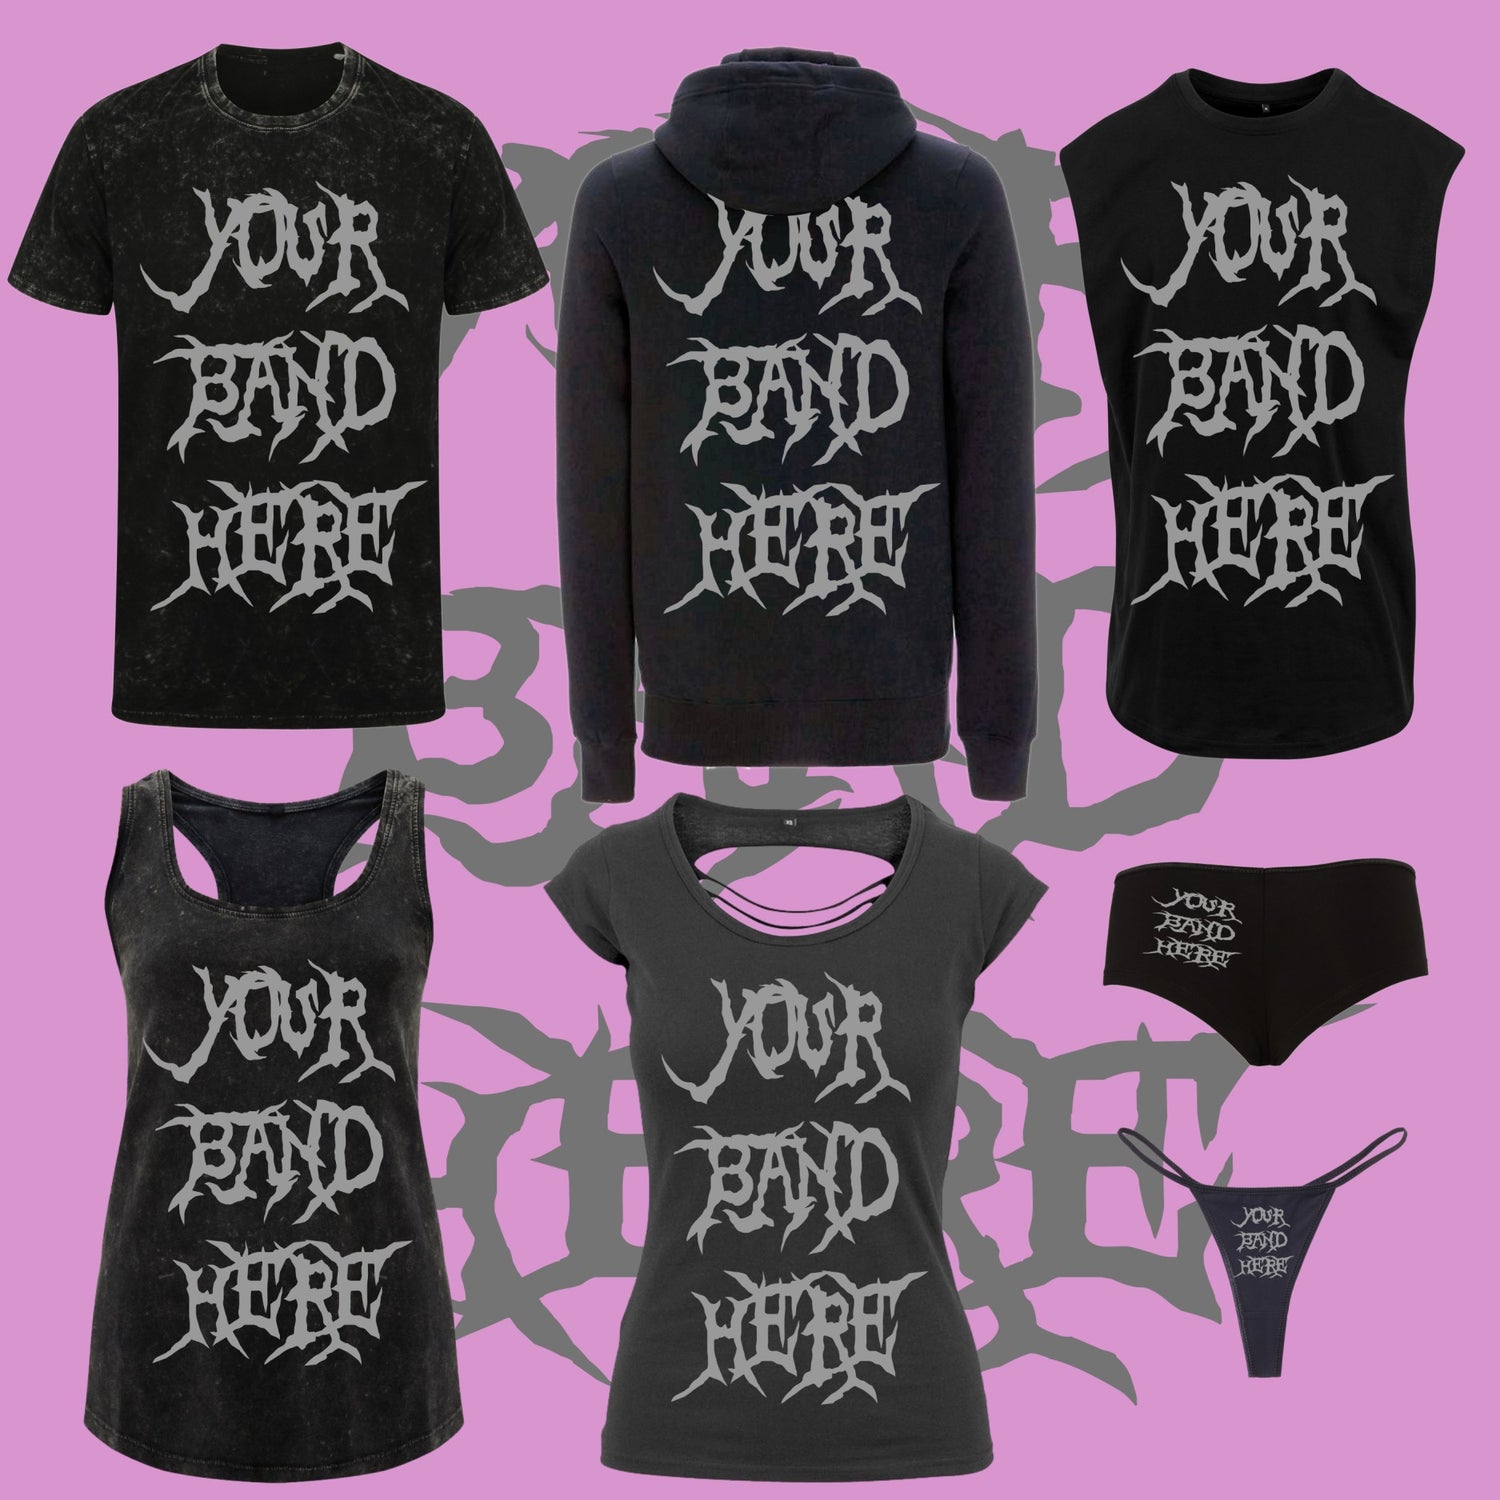 Get you band merch sorted here.